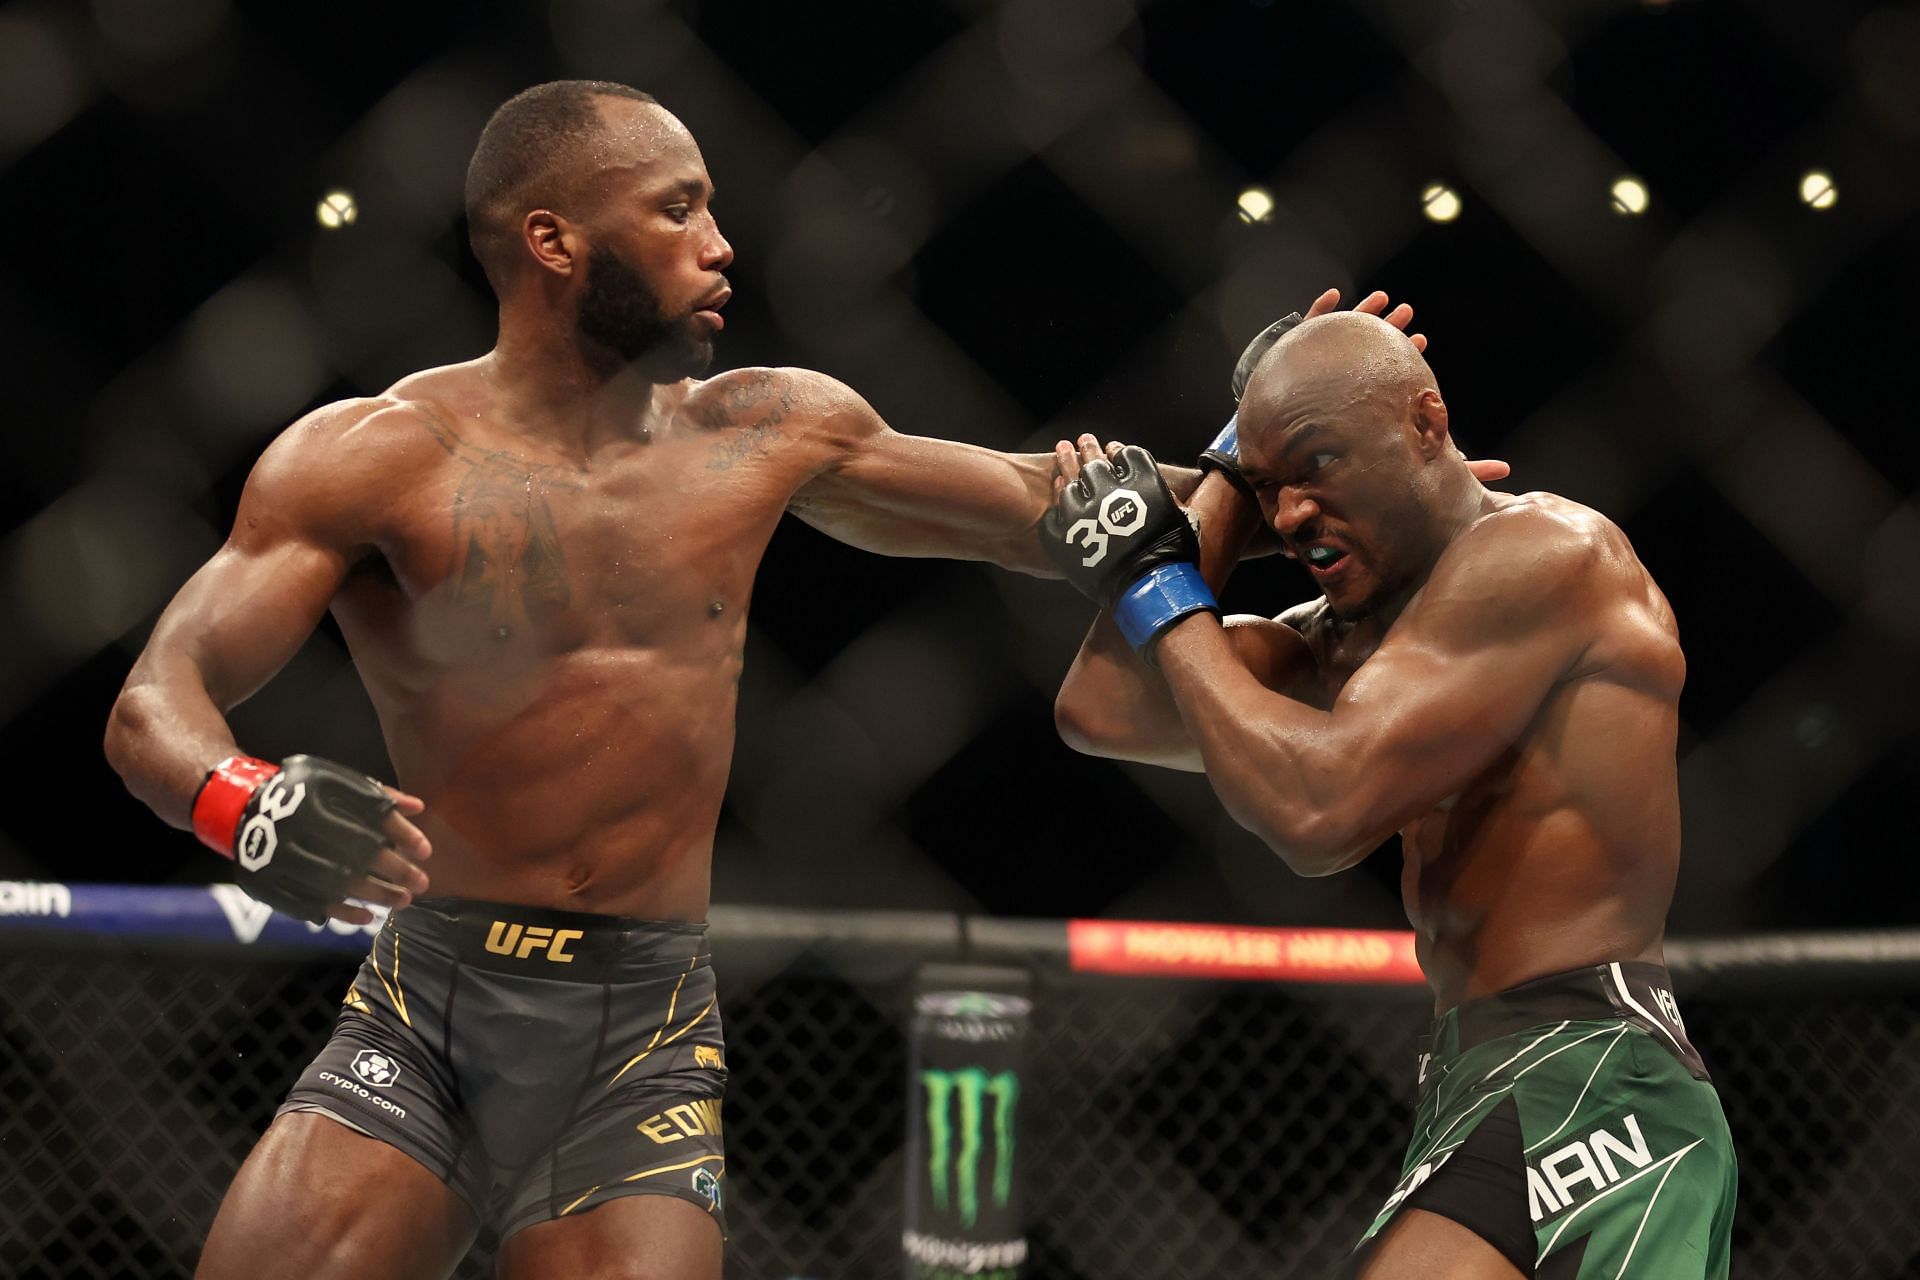 After his second win over Kamaru Usman, nobody should ever doubt Leon Edwards again